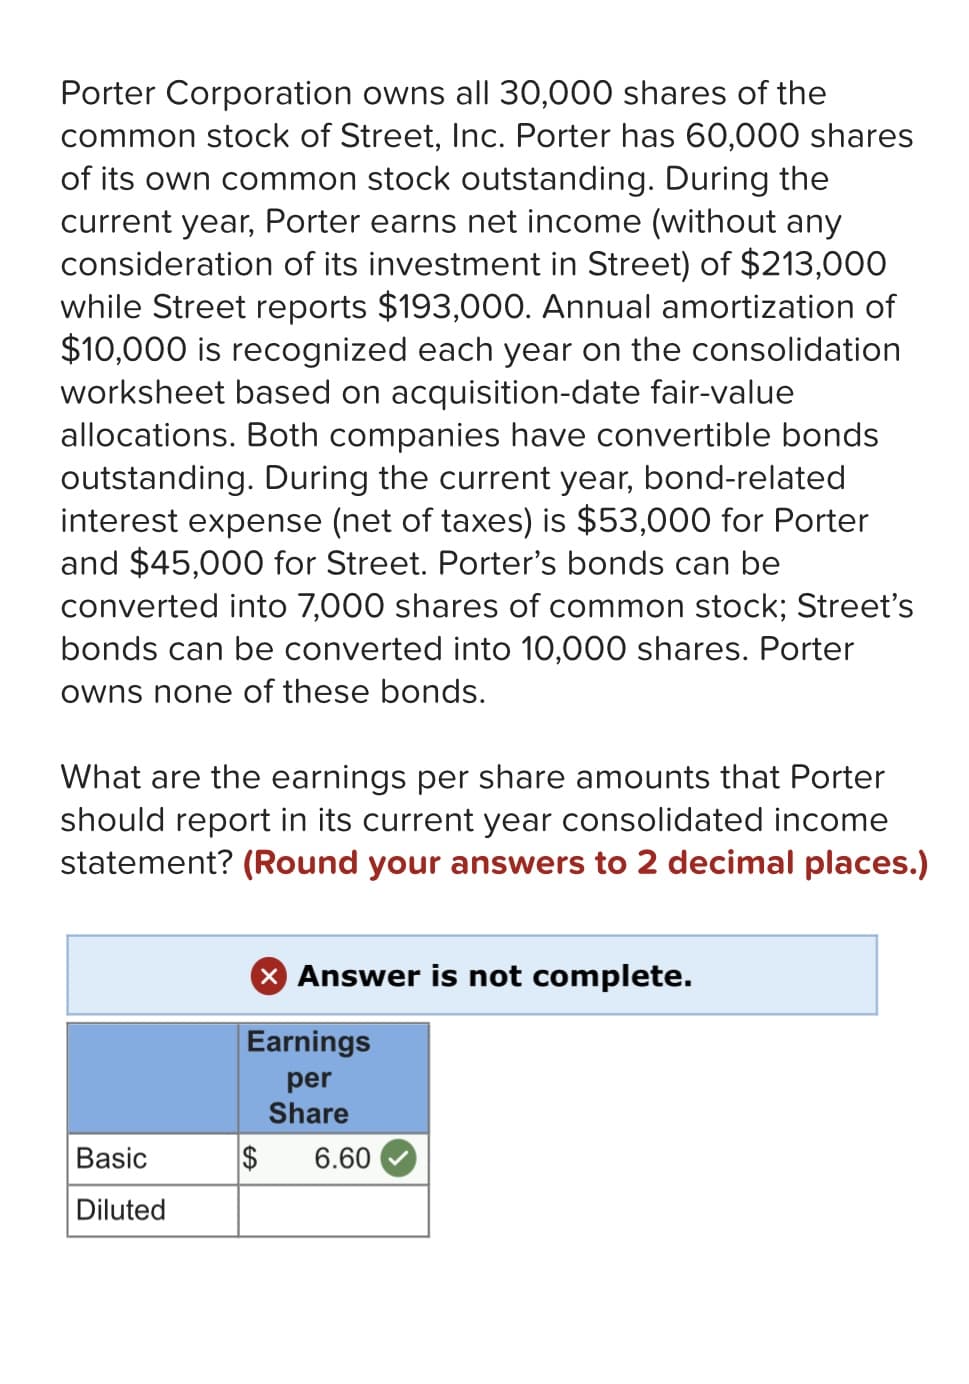 Porter Corporation owns all 30,000 shares of the
common stock of Street, Inc. Porter has 60,000 shares
of its own common stock outstanding. During the
current year, Porter earns net income (without any
consideration of its investment in Street) of $213,000
while Street reports $193,000. Annual amortization of
$10,000 is recognized each year on the consolidation
worksheet based on acquisition-date fair-value
allocations. Both companies have convertible bonds
outstanding. During the current year, bond-related
interest expense (net of taxes) is $53,000 for Porter
and $45,000 for Street. Porter's bonds can be
converted into 7,000 shares of common stock; Street's
bonds can be converted into 10,000 shares. Porter
owns none of these bonds.
What are the earnings per share amounts that Porter
should report in its current year consolidated income
statement? (Round your answers to 2 decimal places.)
Basic
Diluted
Answer is not complete.
Earnings
per
Share
$ 6.60